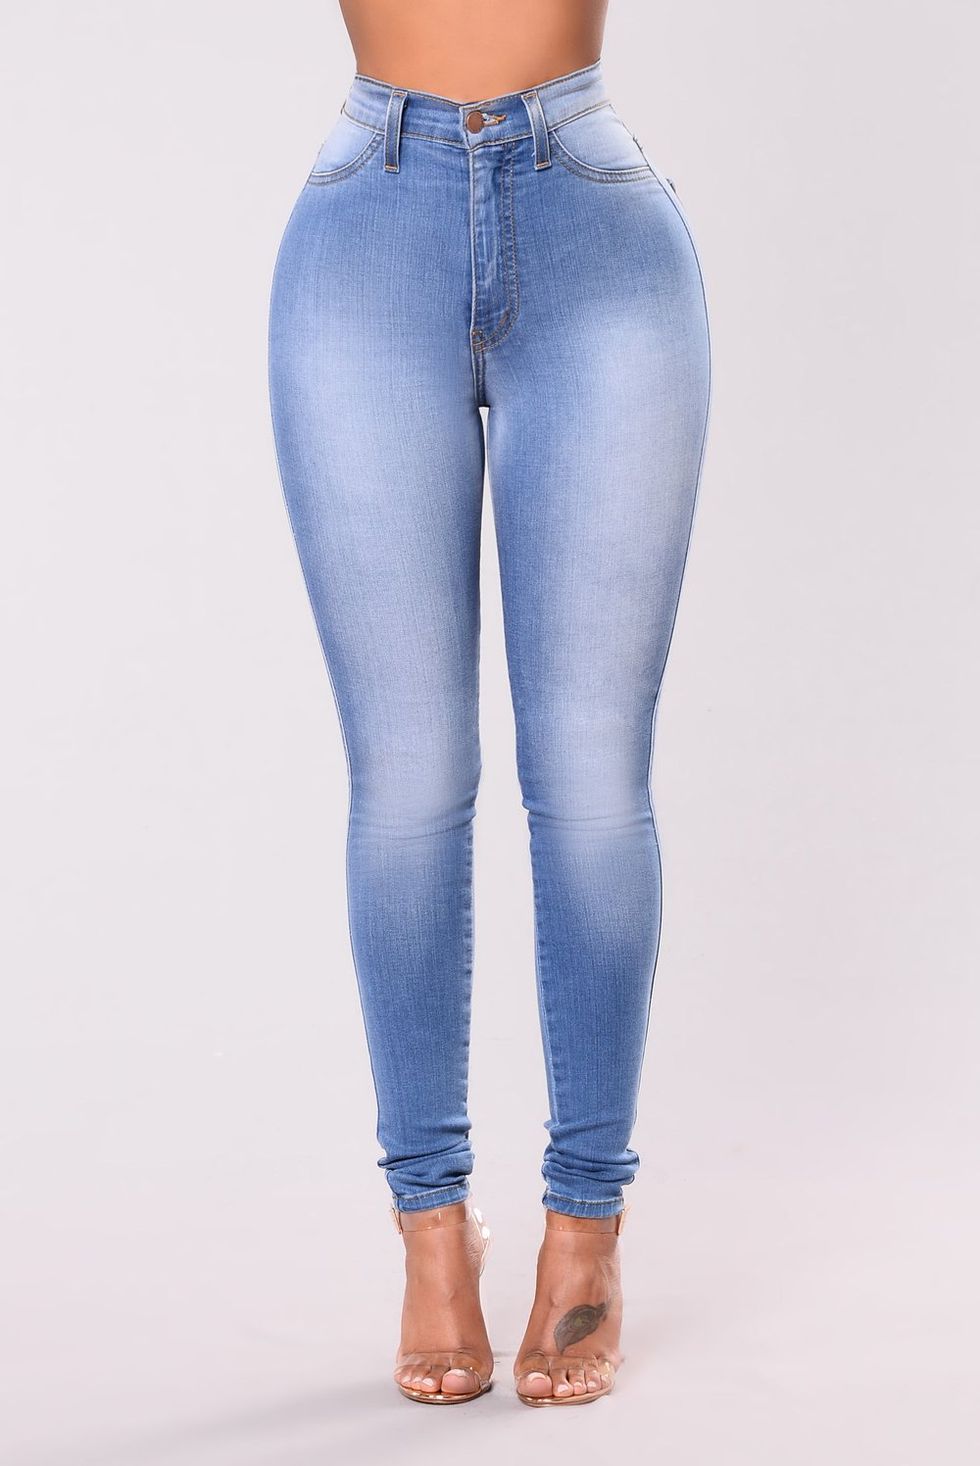 Fashion Nova is selling jeans bizarrely modelled by an EGG – but would you  shell out for them?